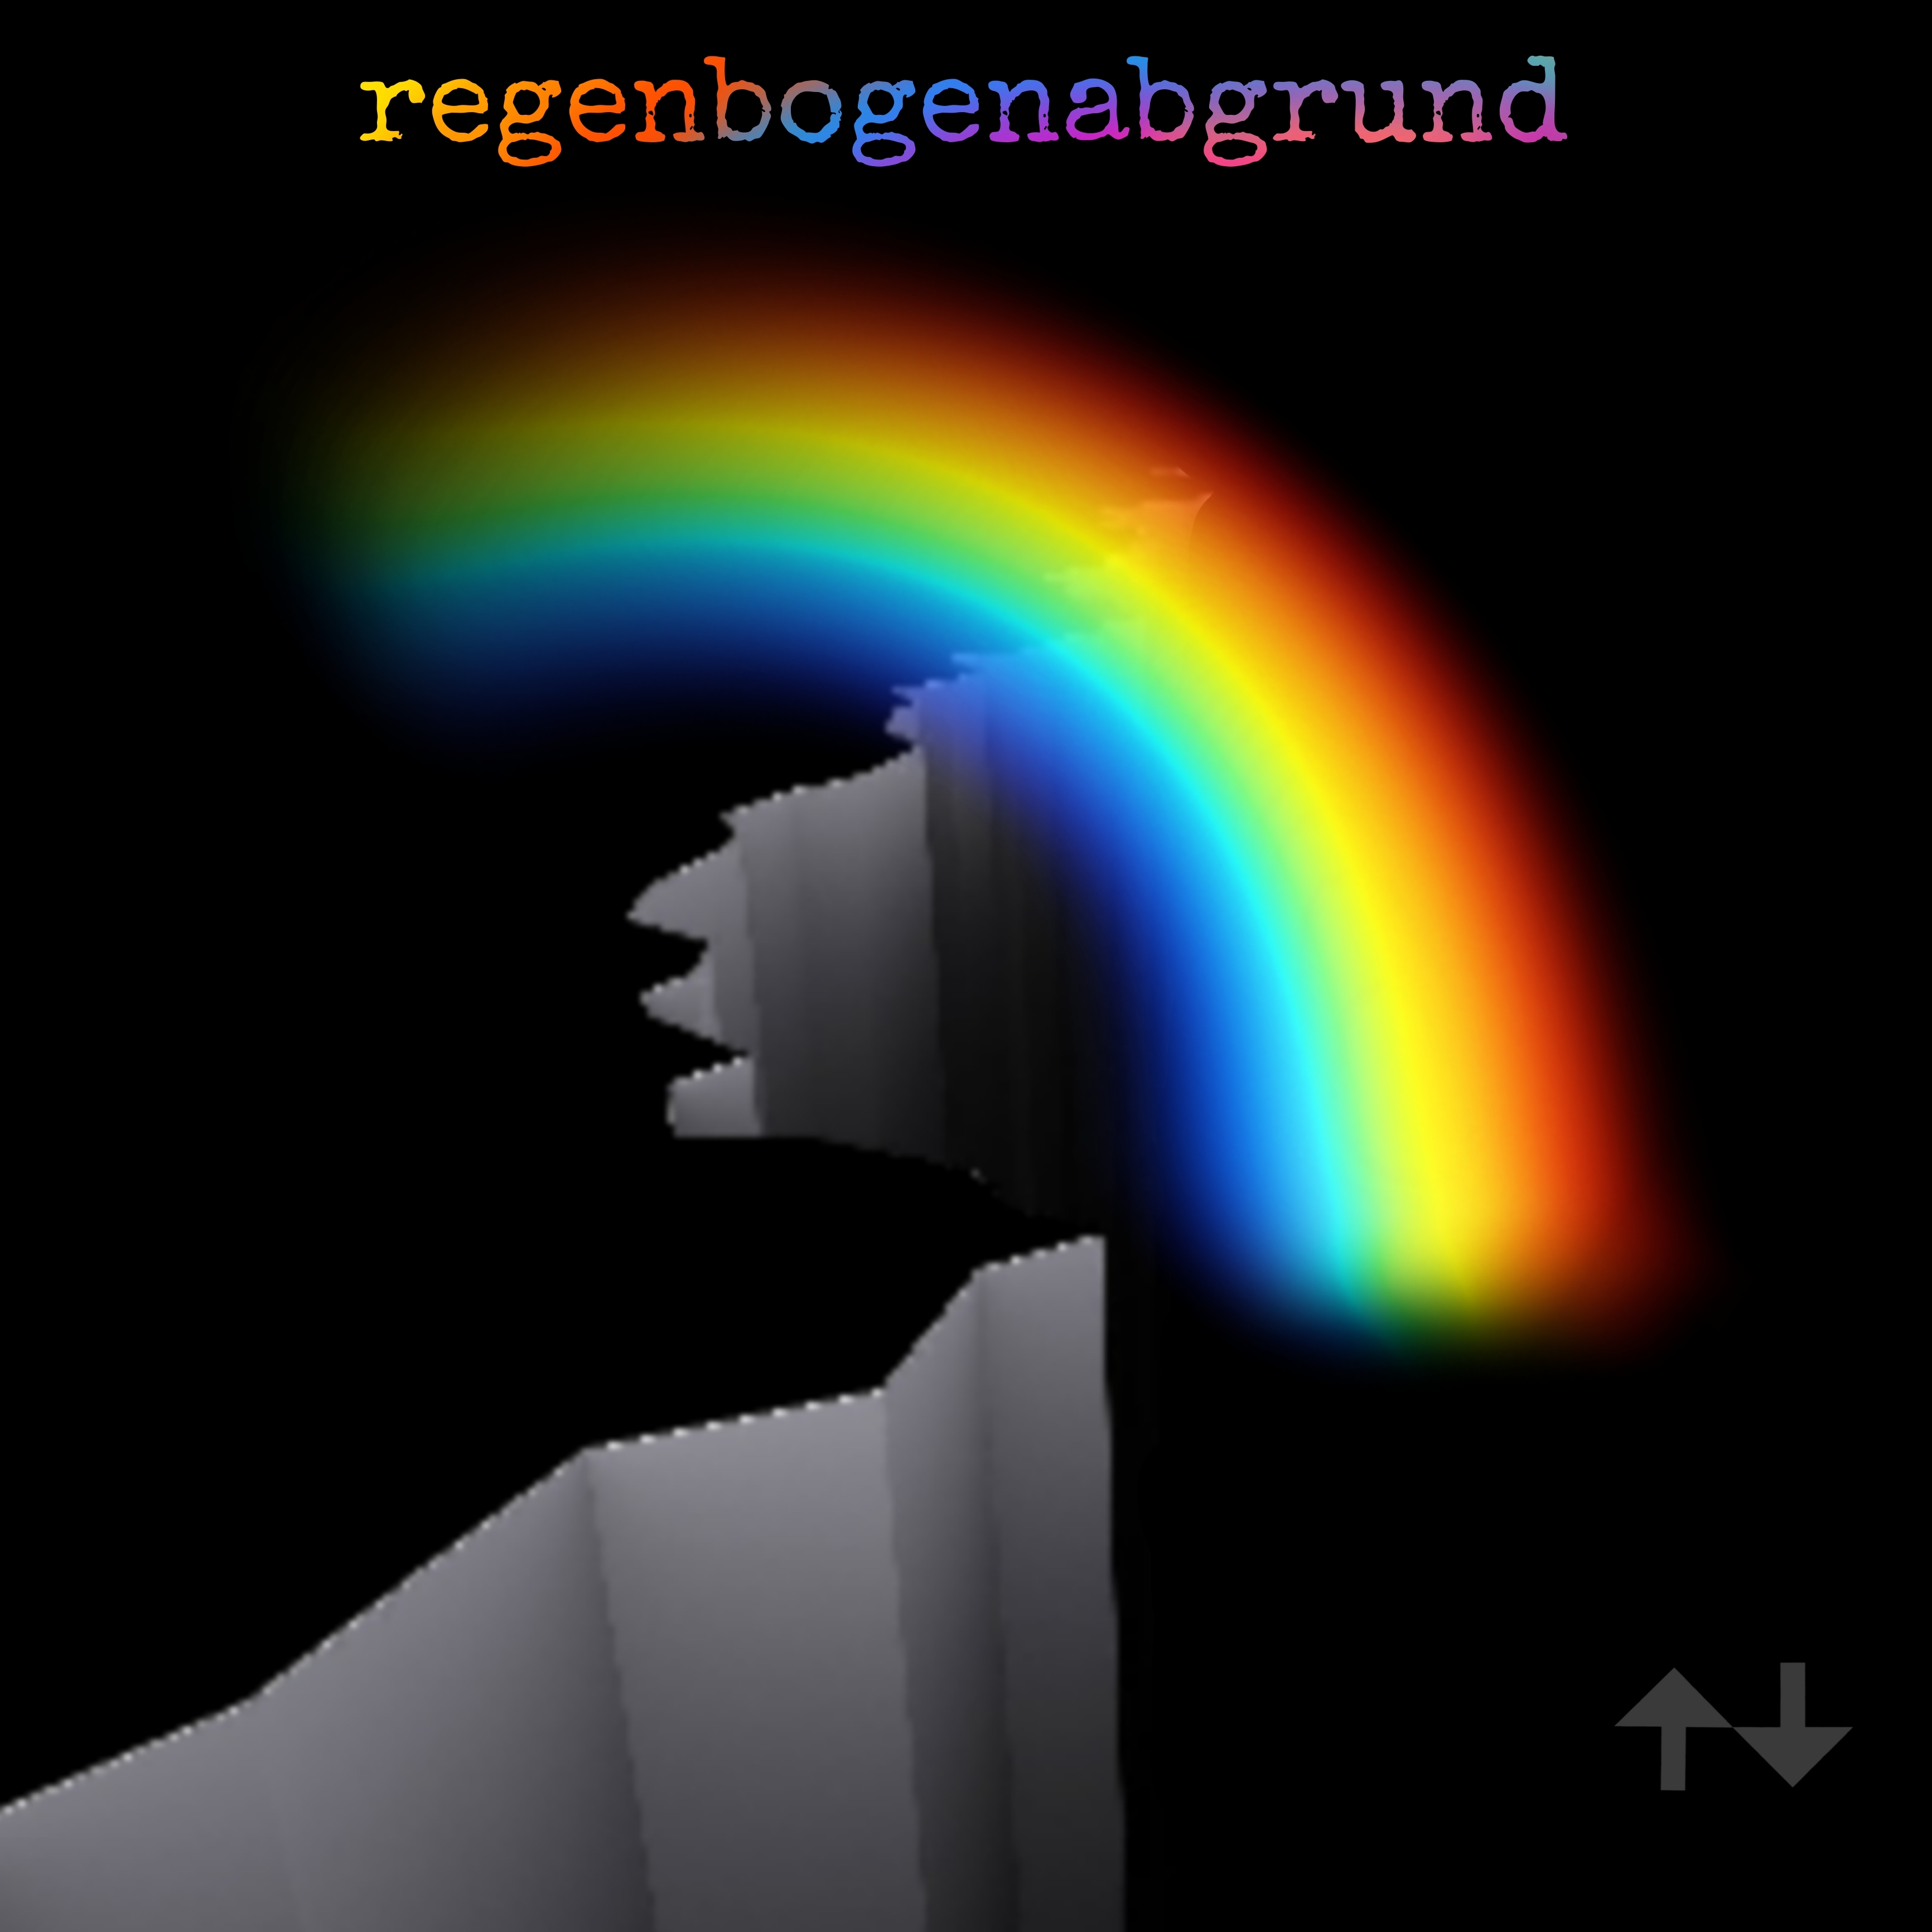 <b>Regenbogenabgrund - Rainbow abyss</b><br/><br/>The rainbow abyss; Beyond polarizing, igniting something worthwile out of suffering; we can find enlightenment in the deepest depths of despair.<br/><br>To exist means to suffer; but to live means to find joy in the process of suffering.<br/>What even is darkness? And why do we give it a negative value? Isn't darkness just the medium, like an empty piece of paper that wants to be filled?<br/>Why does a lack of a pre-defined sense of purpose appear depressing to us, if we ourselves can create sense entirely on our own? Why don't we find it liberating to decide for ourselves what we want to do with the short period of time we are able to experience consciousness?<br/><br/>A pre-defined sense of purpose would be too futile - and isn't it kind of ironic?